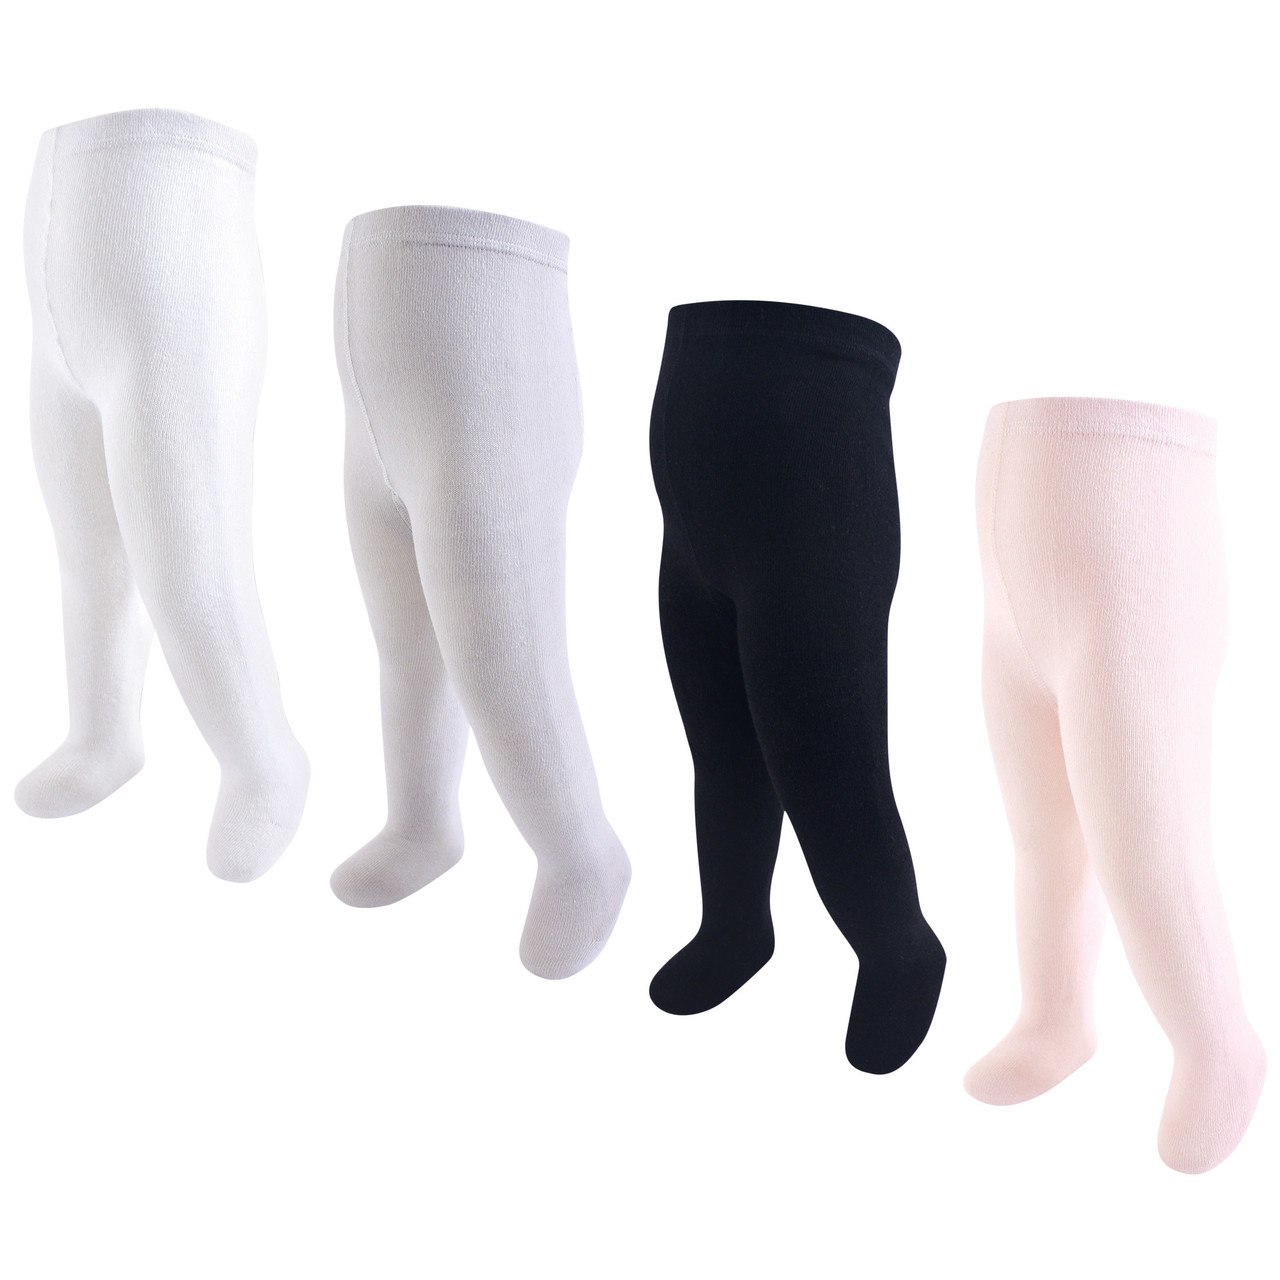 Buy Pack of 5 Four Way Stretch 100% Cotton Leggings by Vrindam